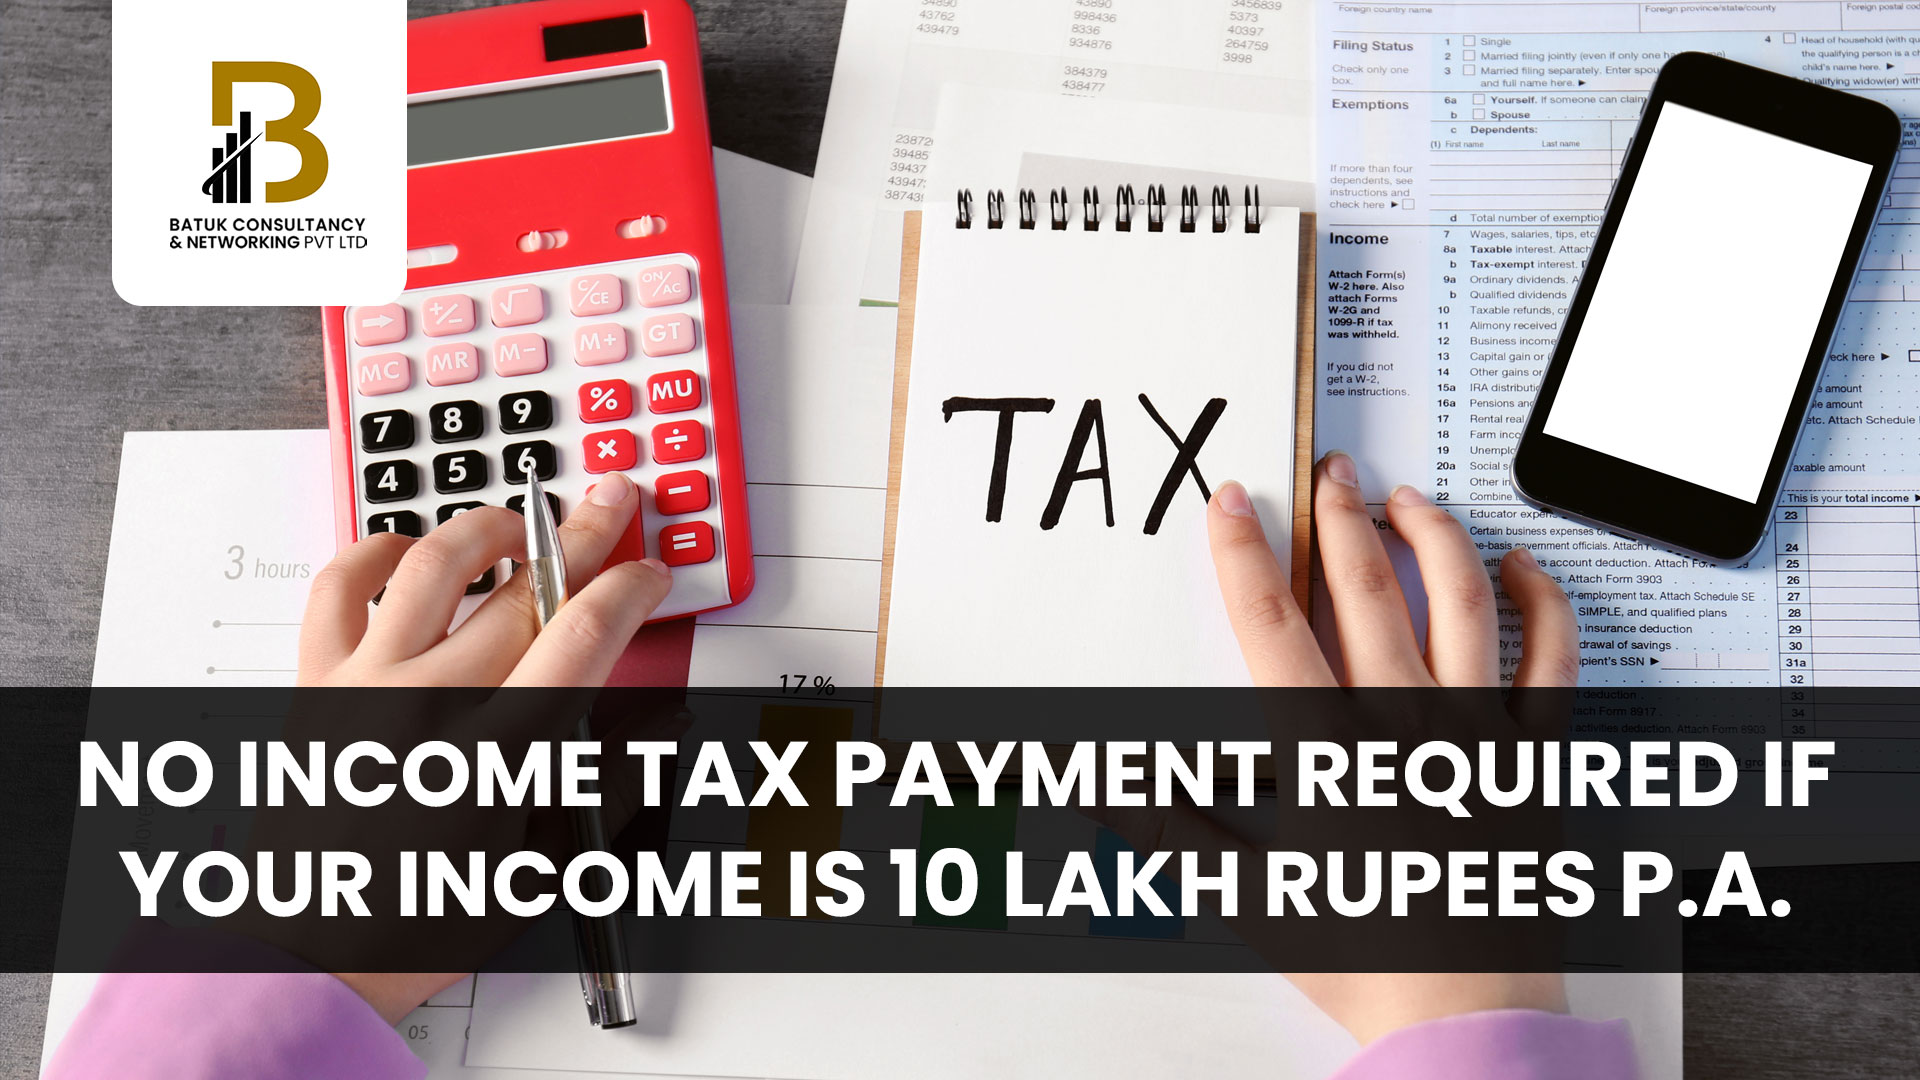 No Income tax payment required if your income is 10 Lakh Rupees P.a.